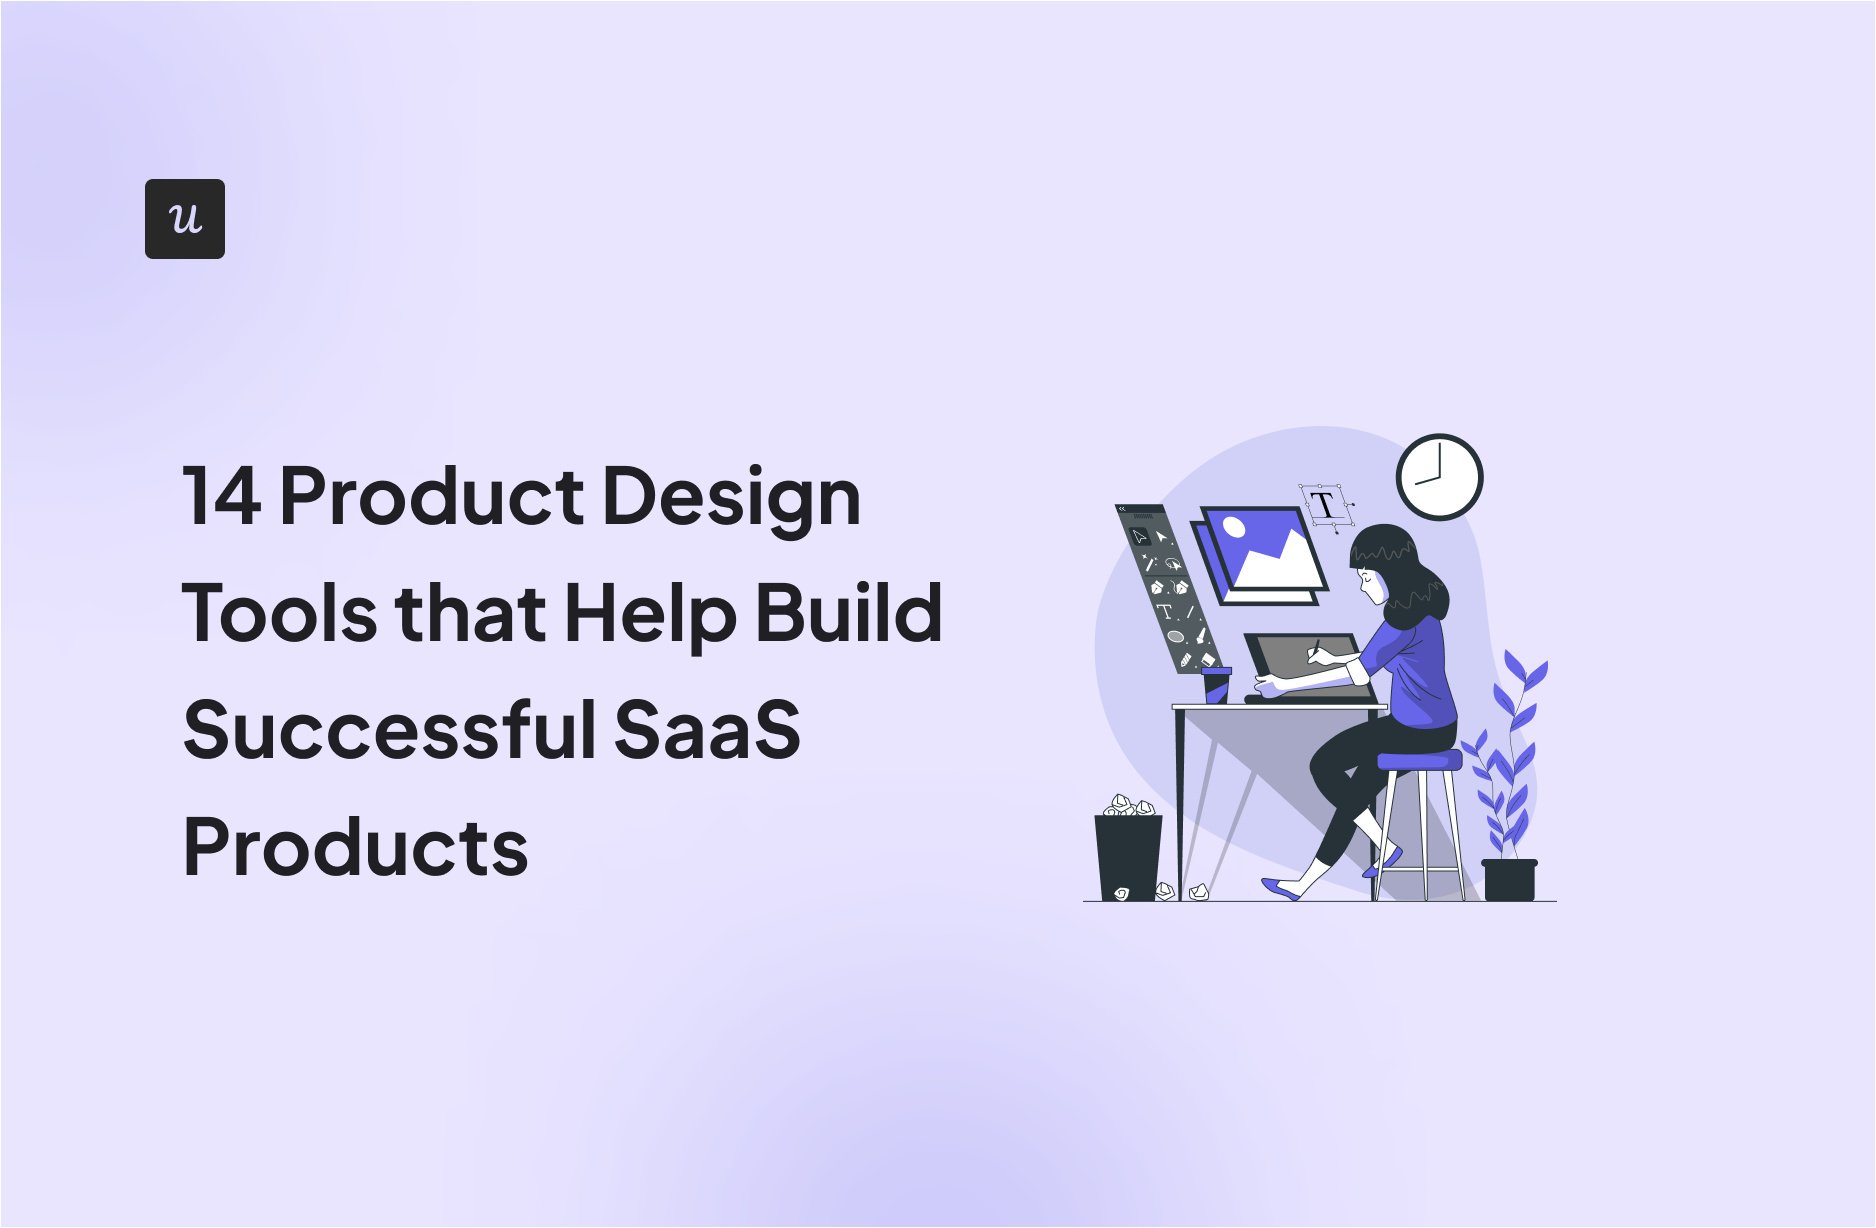 14 Product Design Tools that Help Build Successful SaaS Products